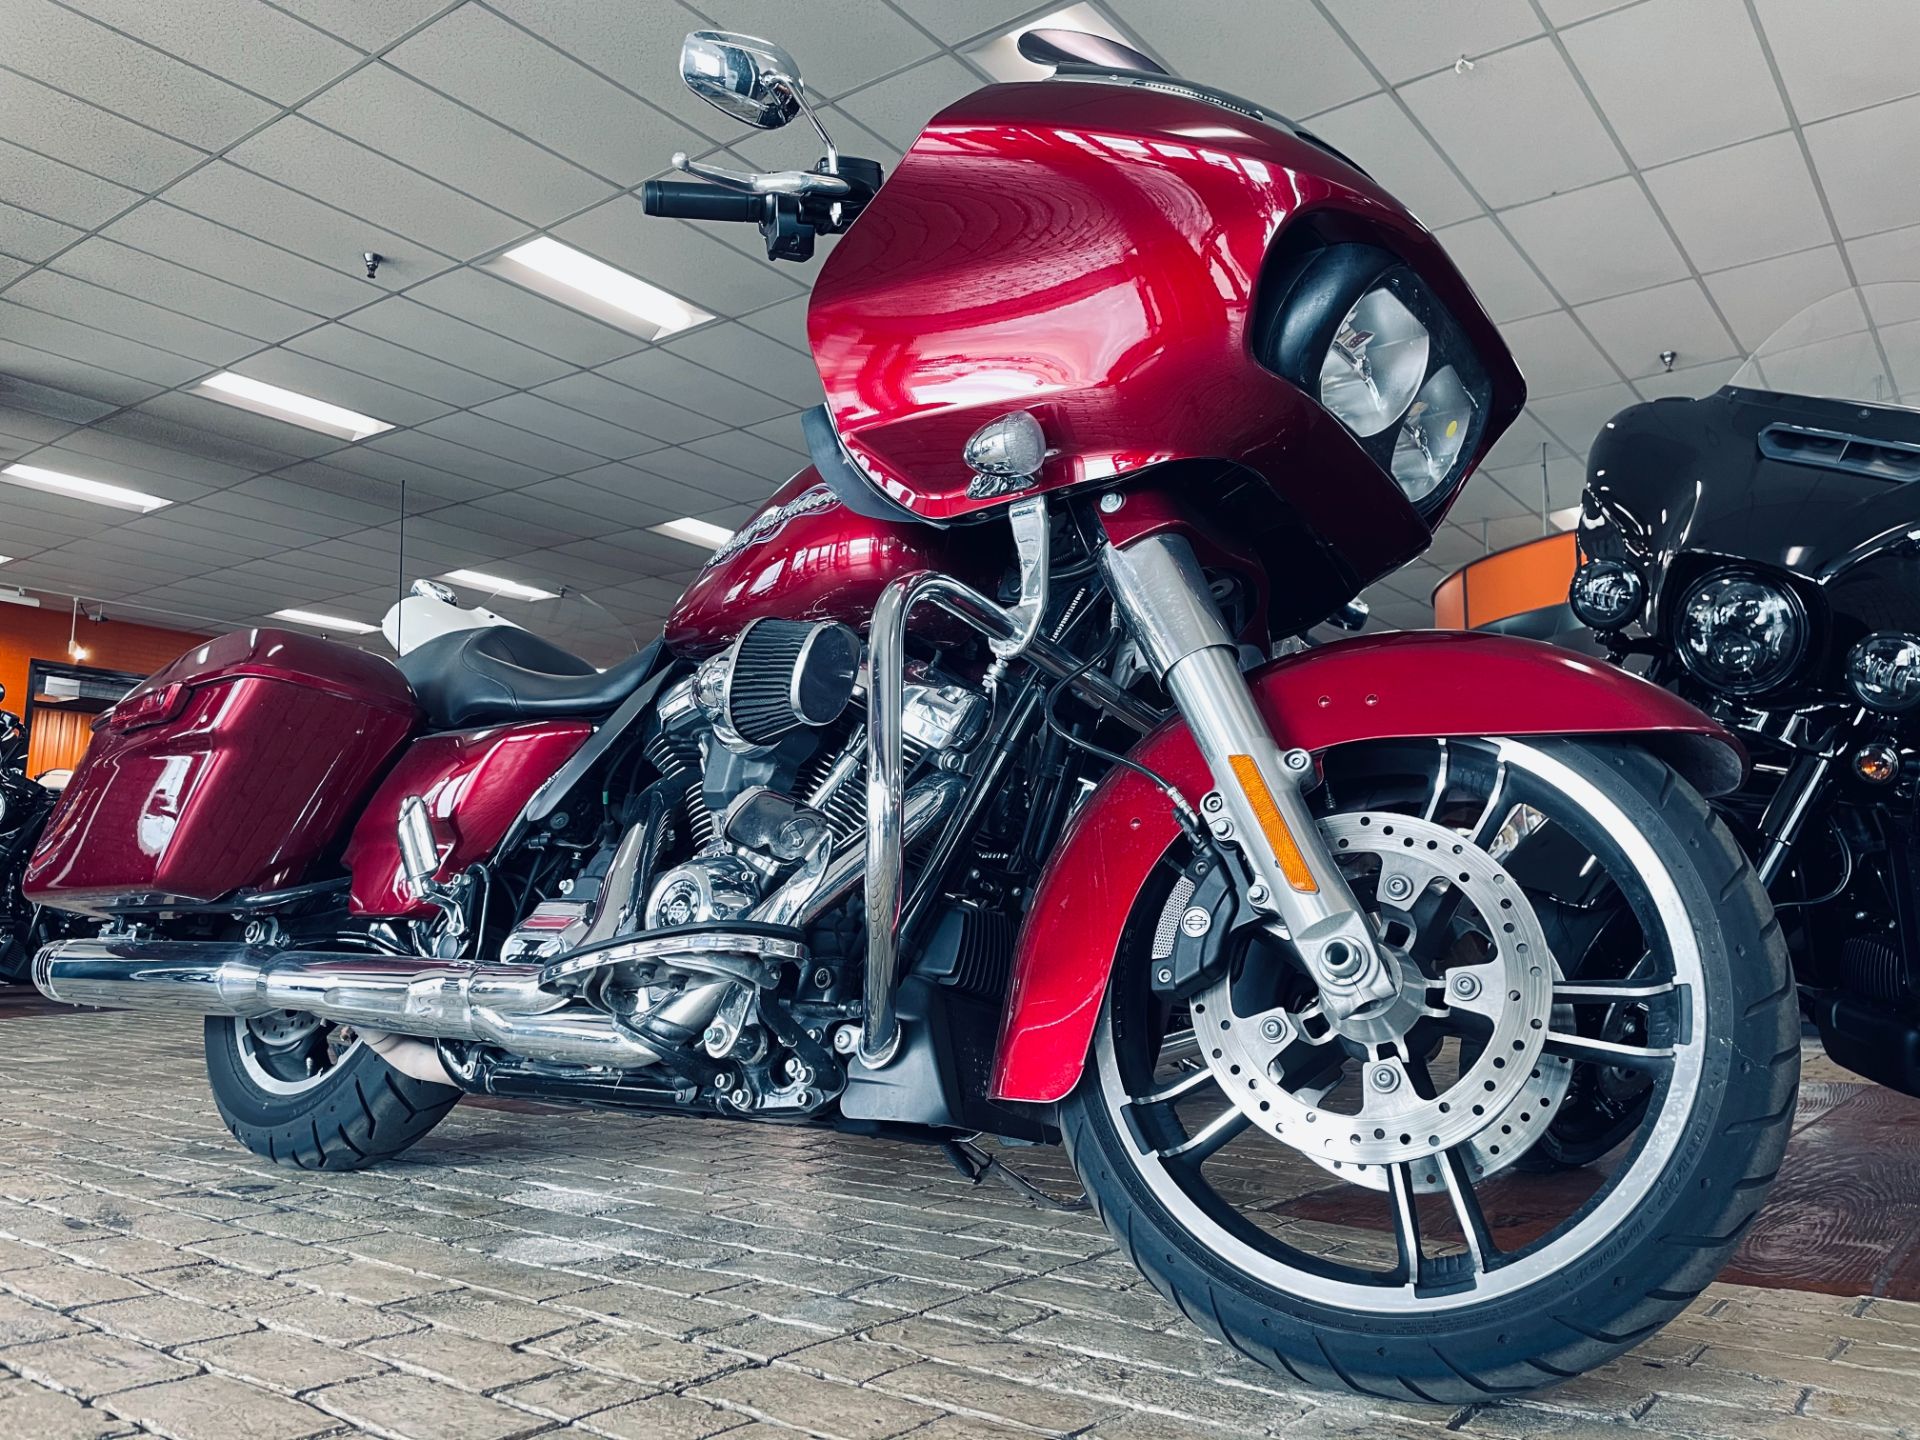 2017 Harley-Davidson Road Glide Special in Marion, Illinois - Photo 1